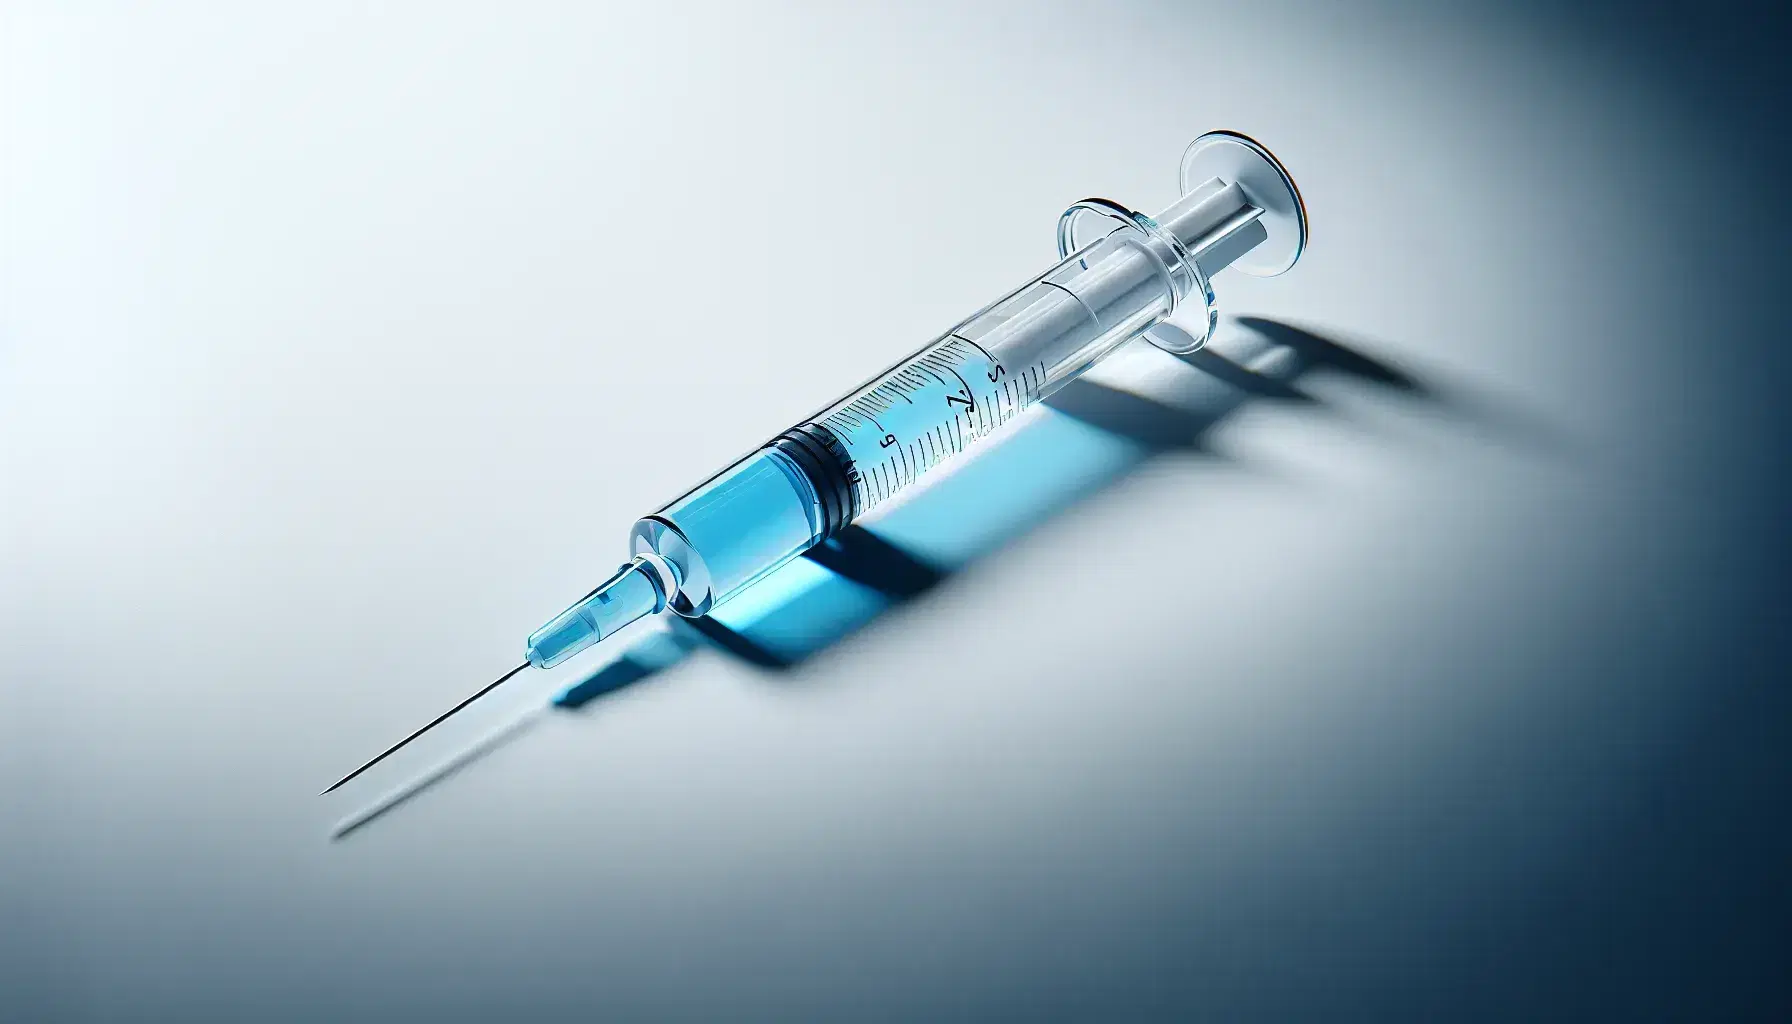 Transparent glass syringe with bright blue liquid, placed horizontally on a white background, with a protective cap and light shadow.